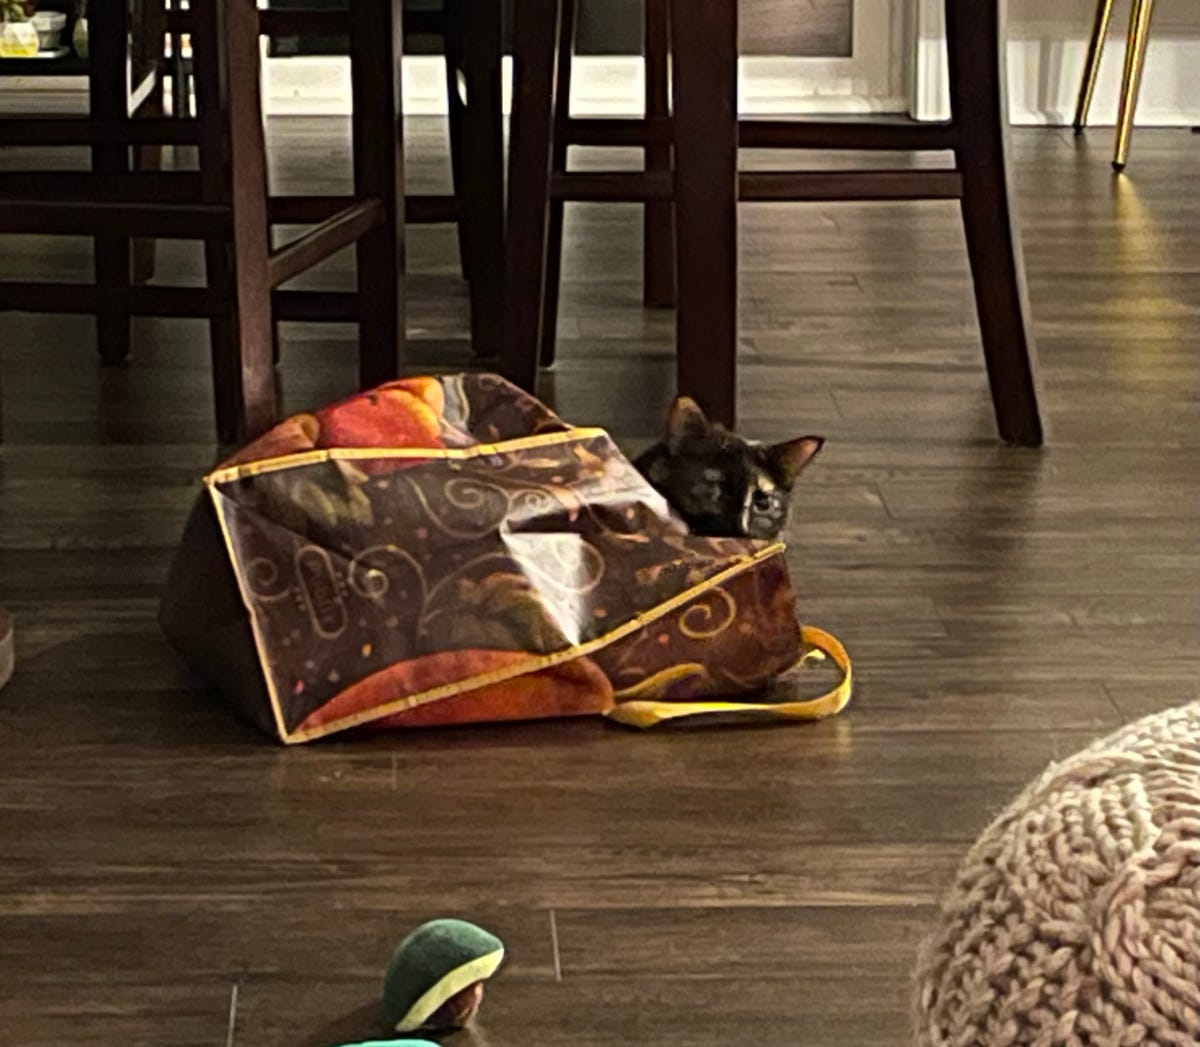 A cat peers out from a tote bag on the floor